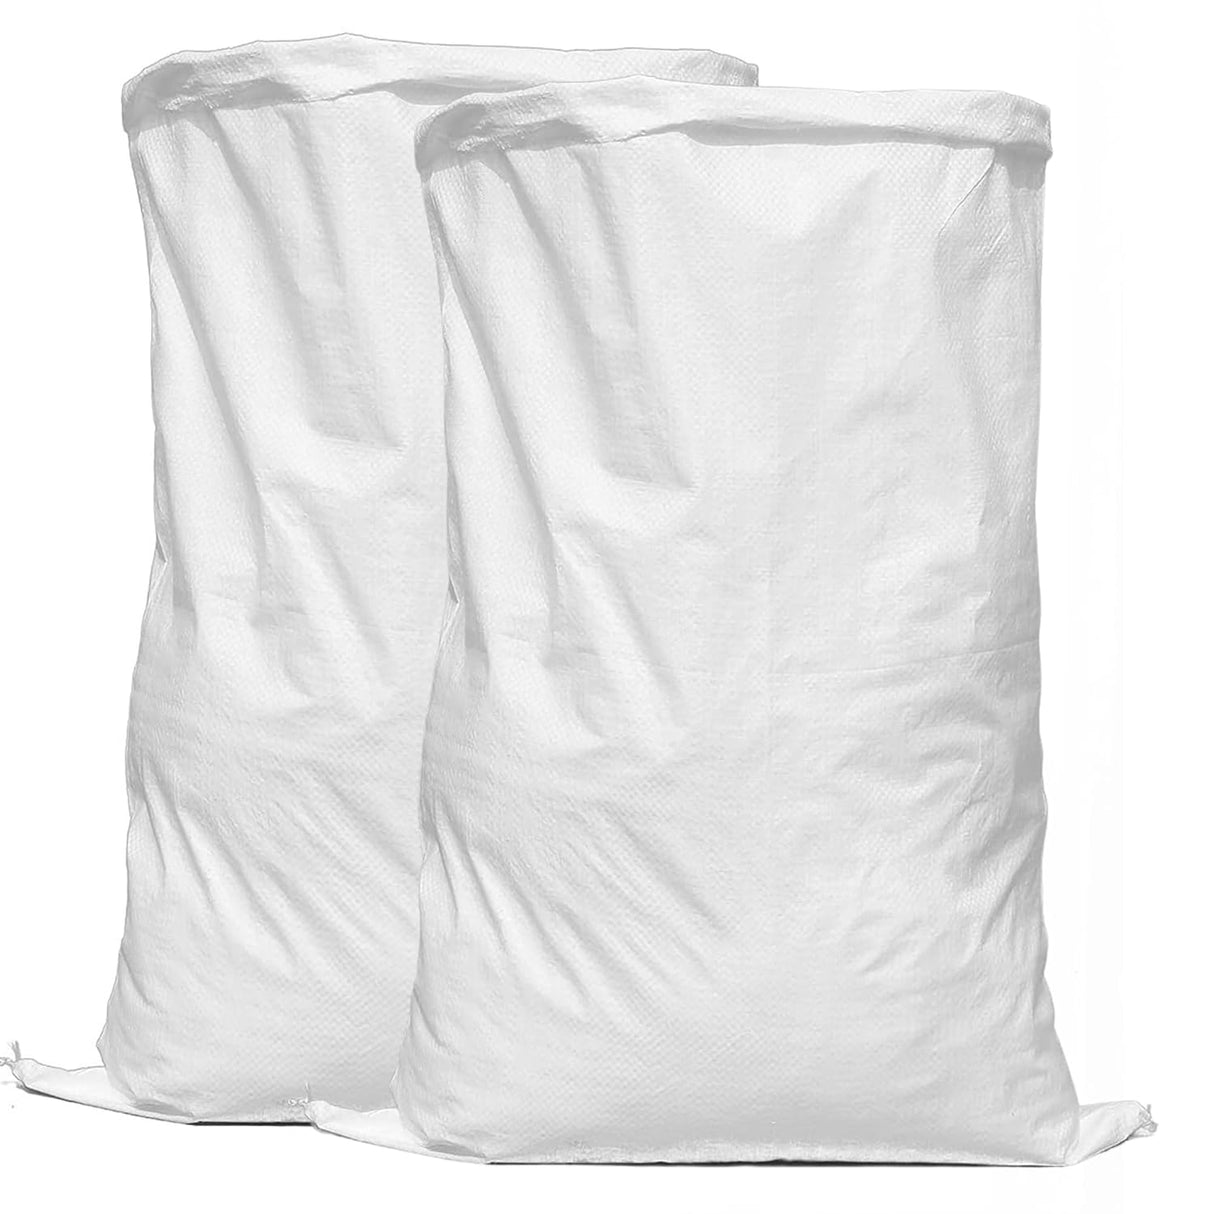 Singhal Empty Bag, Bora, Bori for Packing of Food, Vegatable, Grains, Wheat, Rice, Sugar etc Products (27x45 inches) - Pack of 15